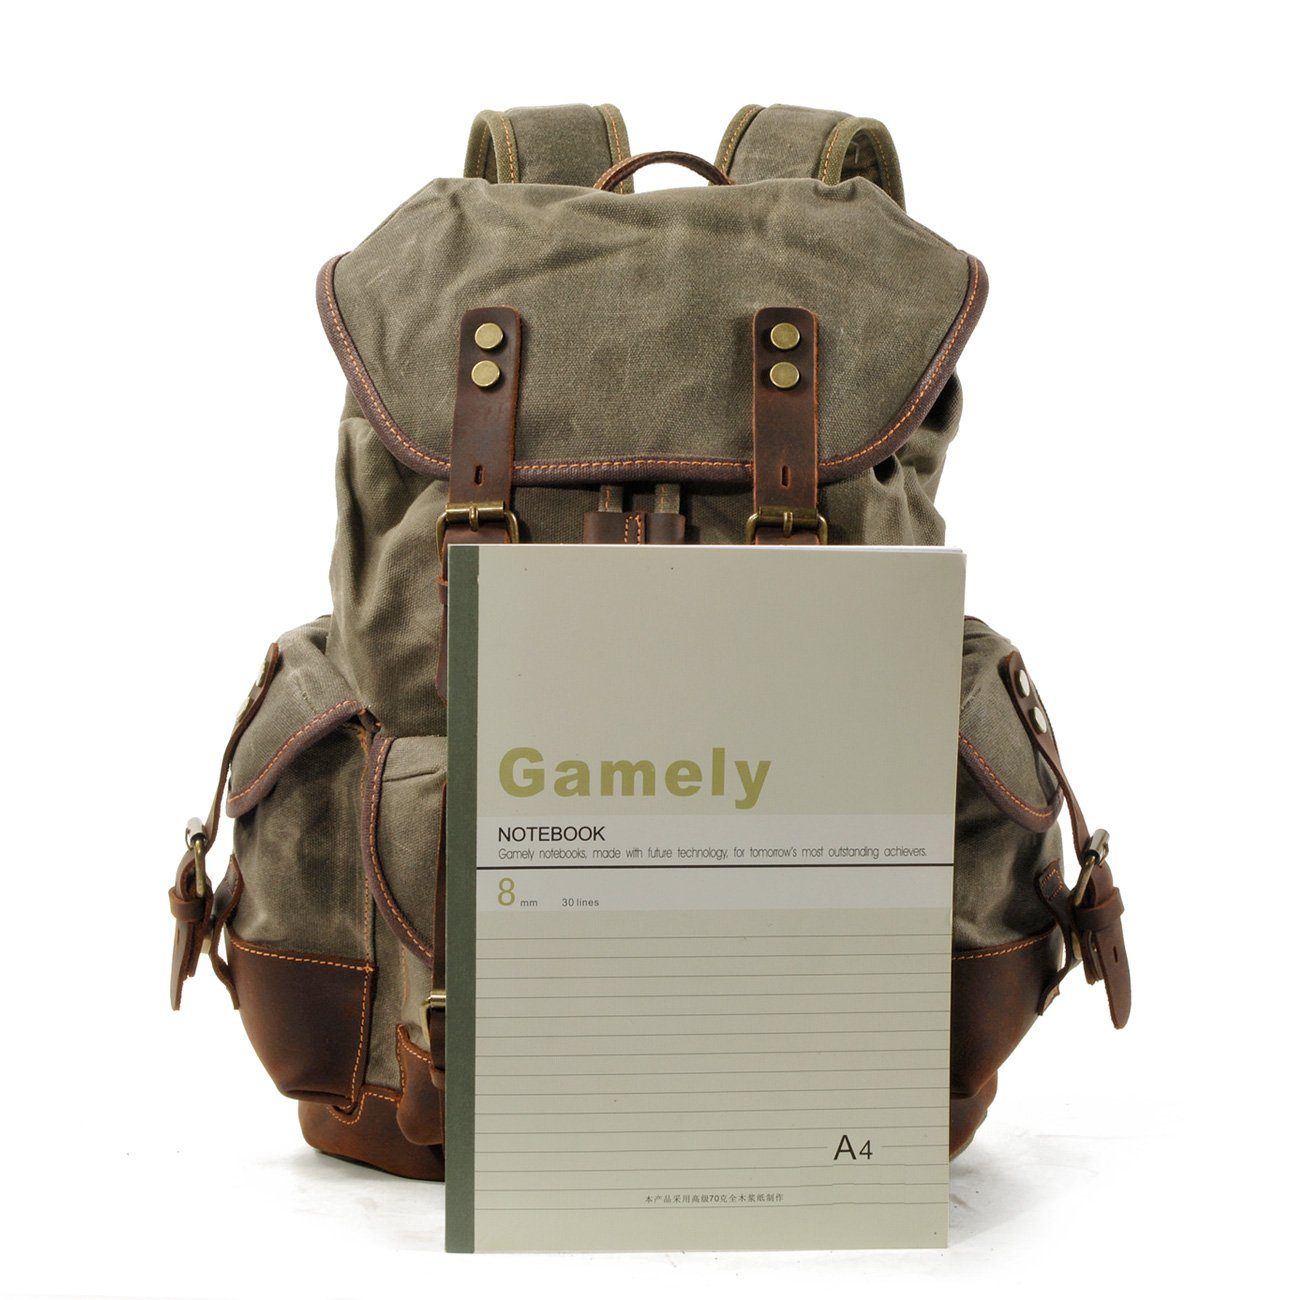 large canvas hiking backpack